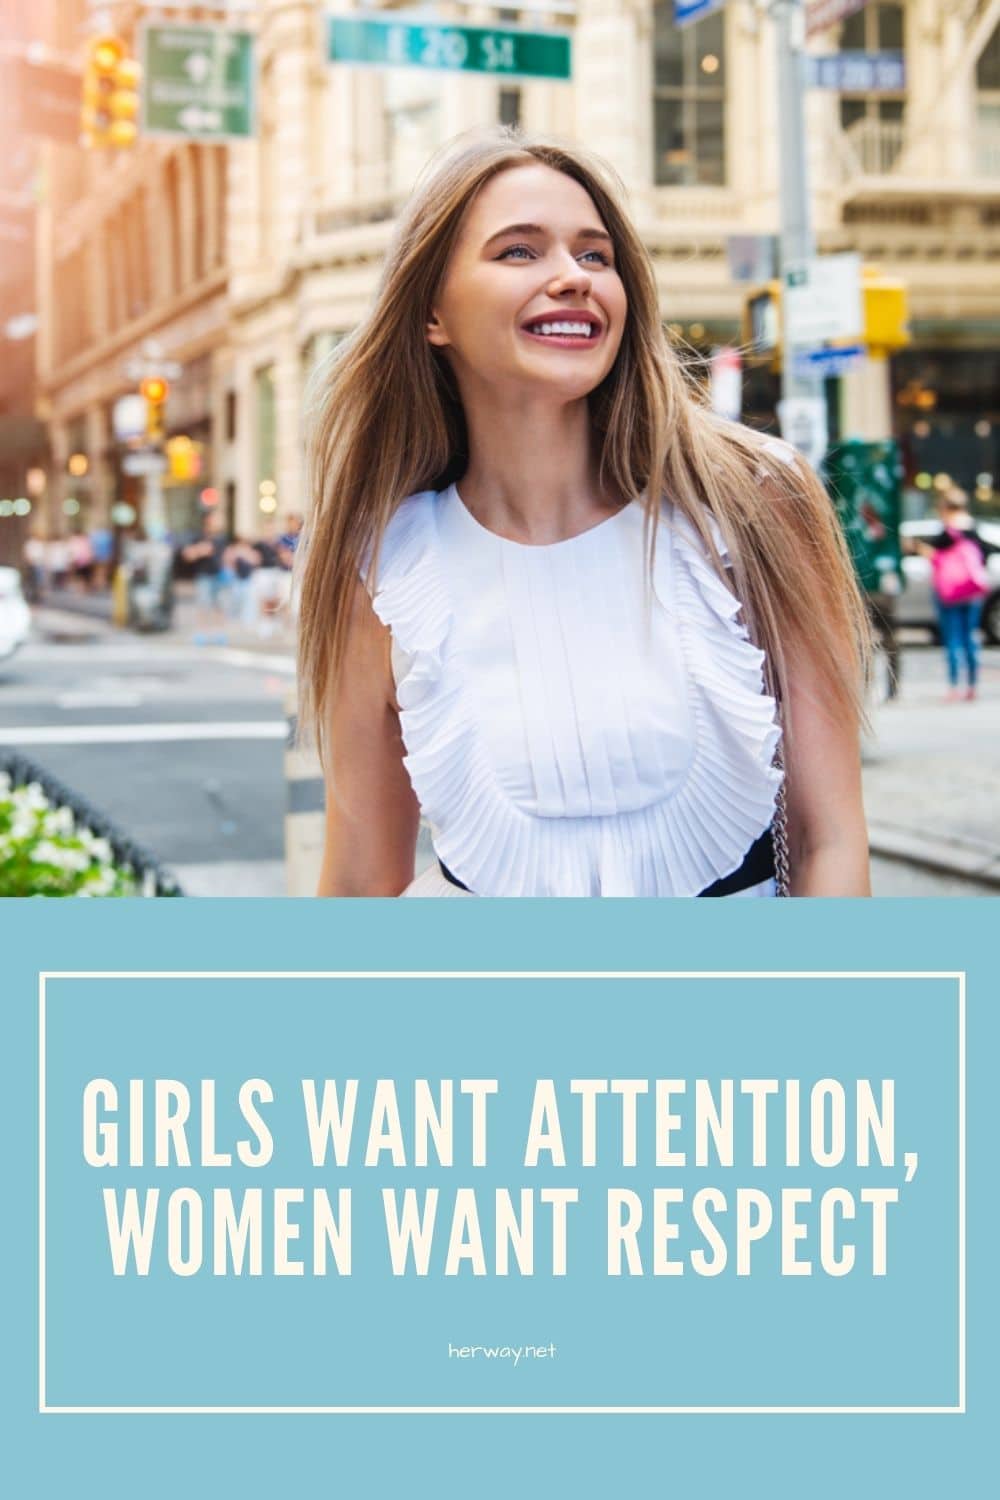 Why do women need attention